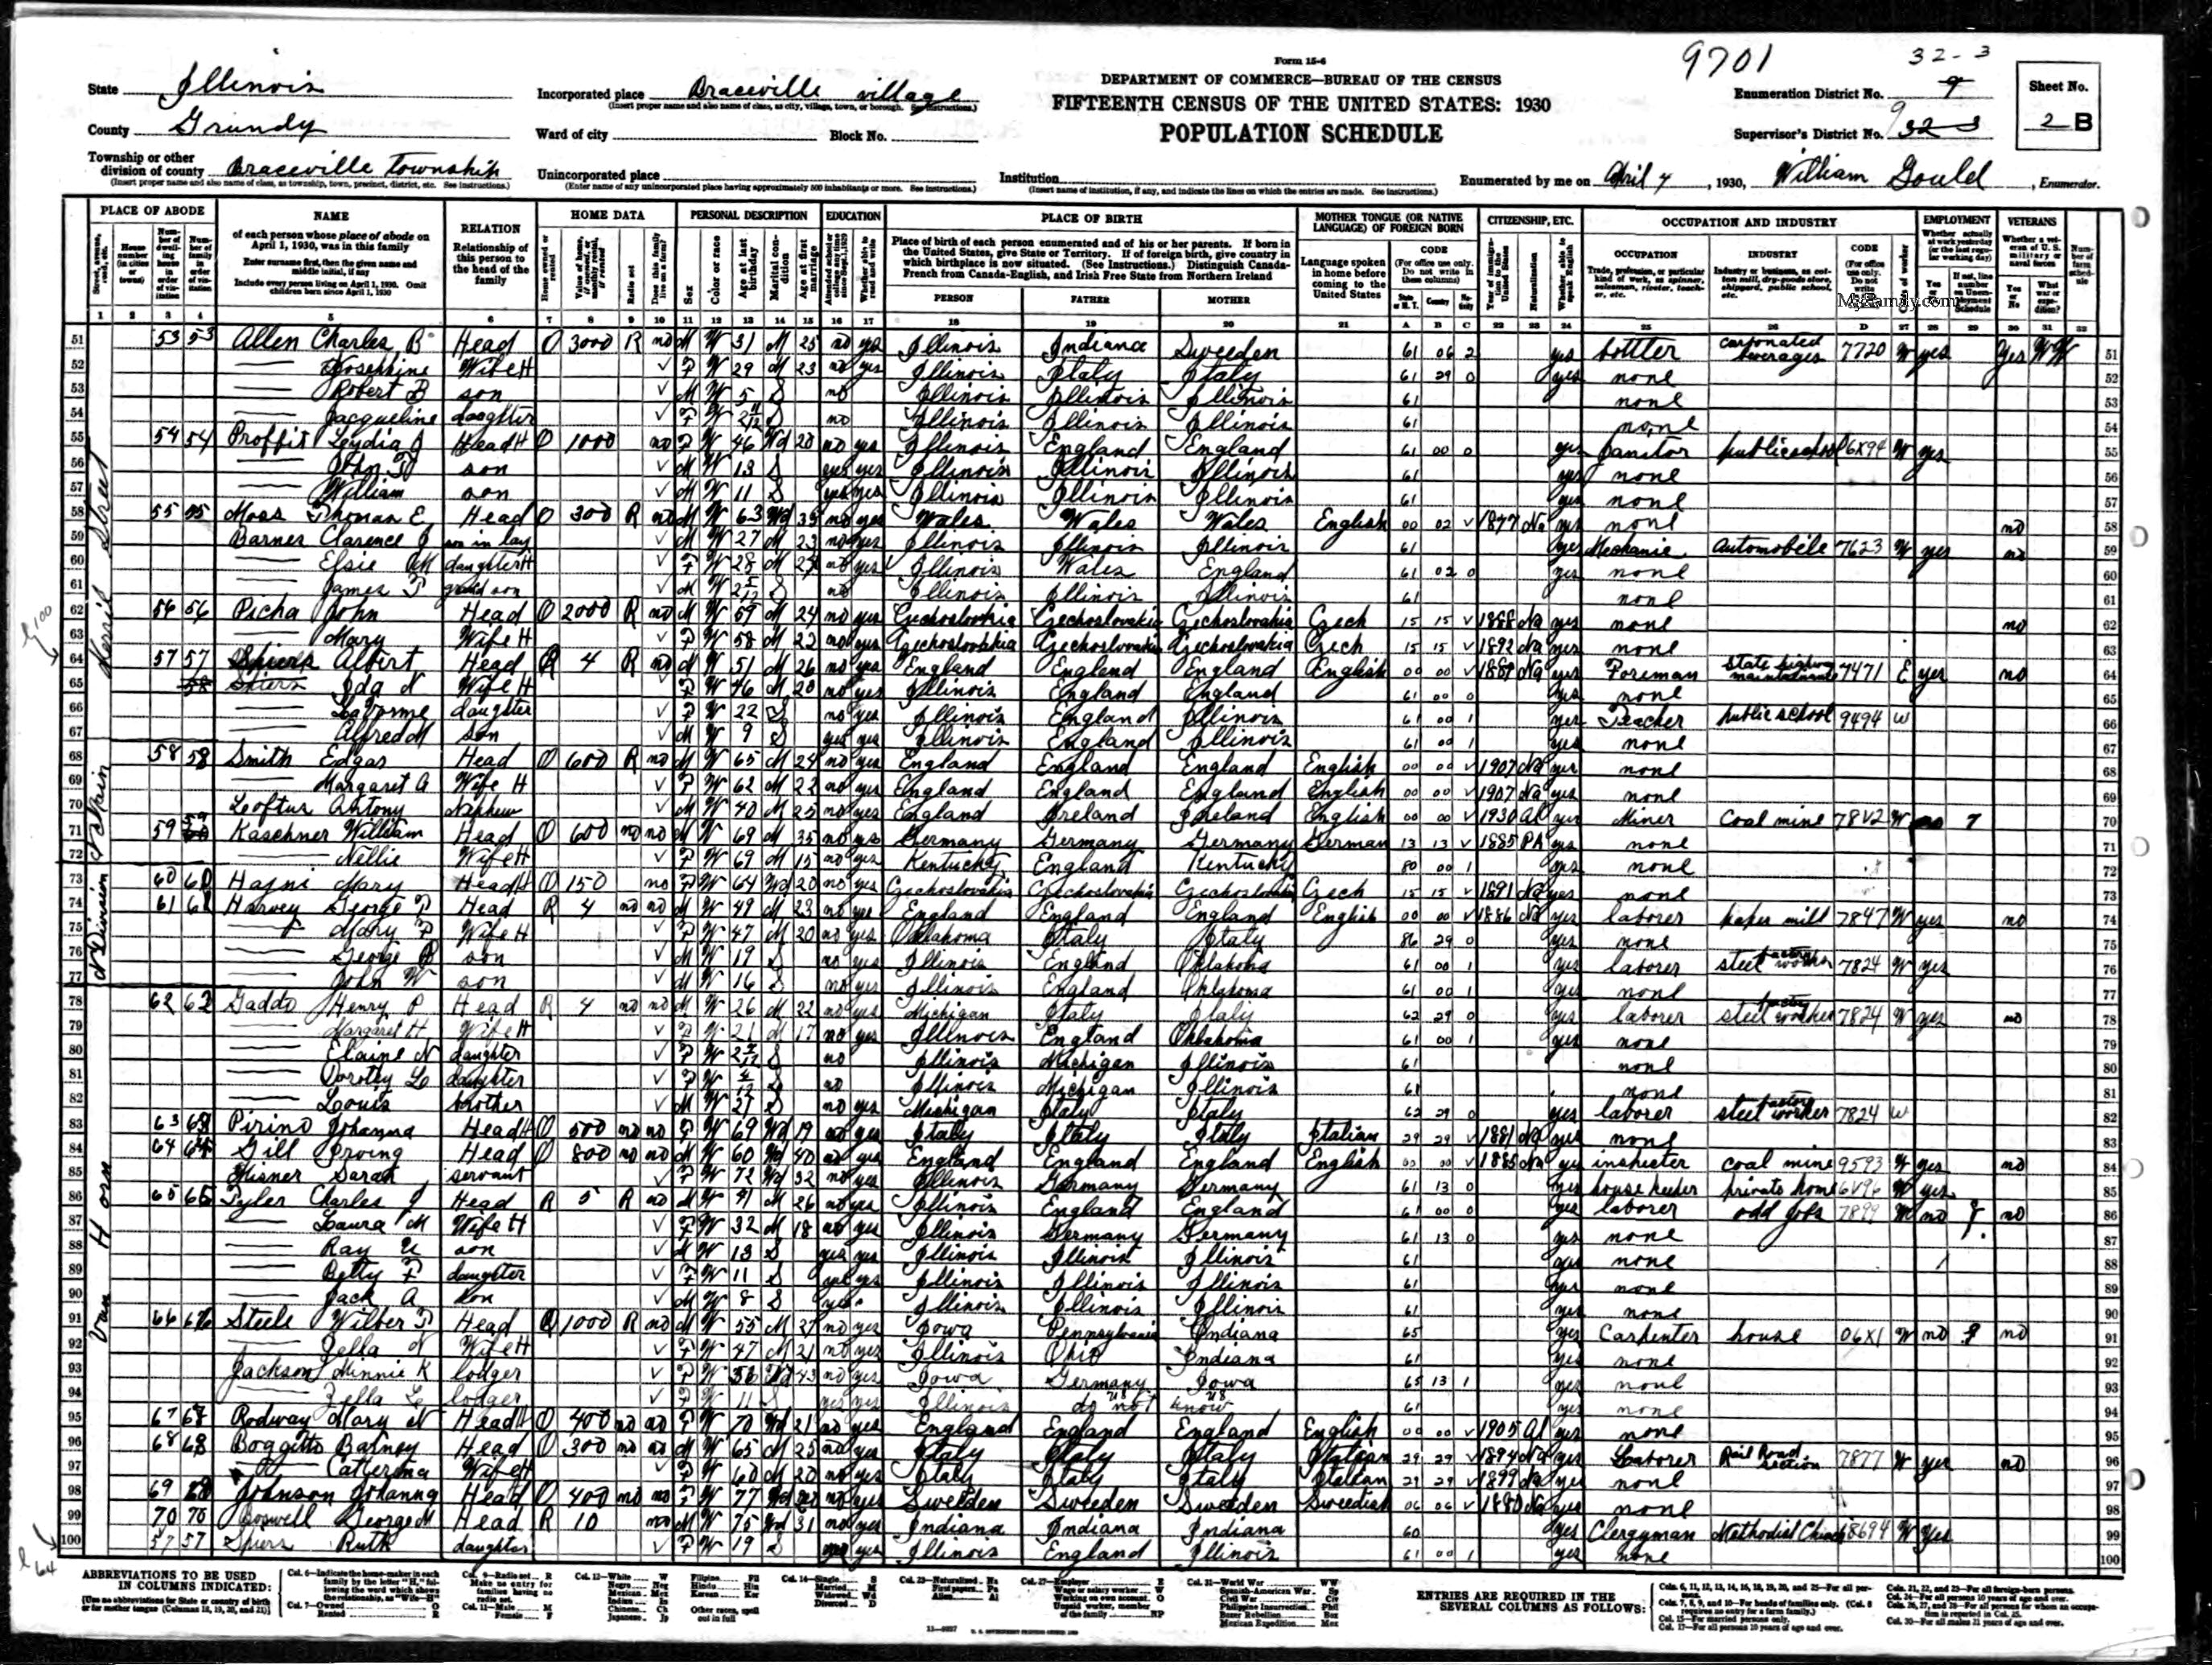 Mary Rodway in the 1930 census